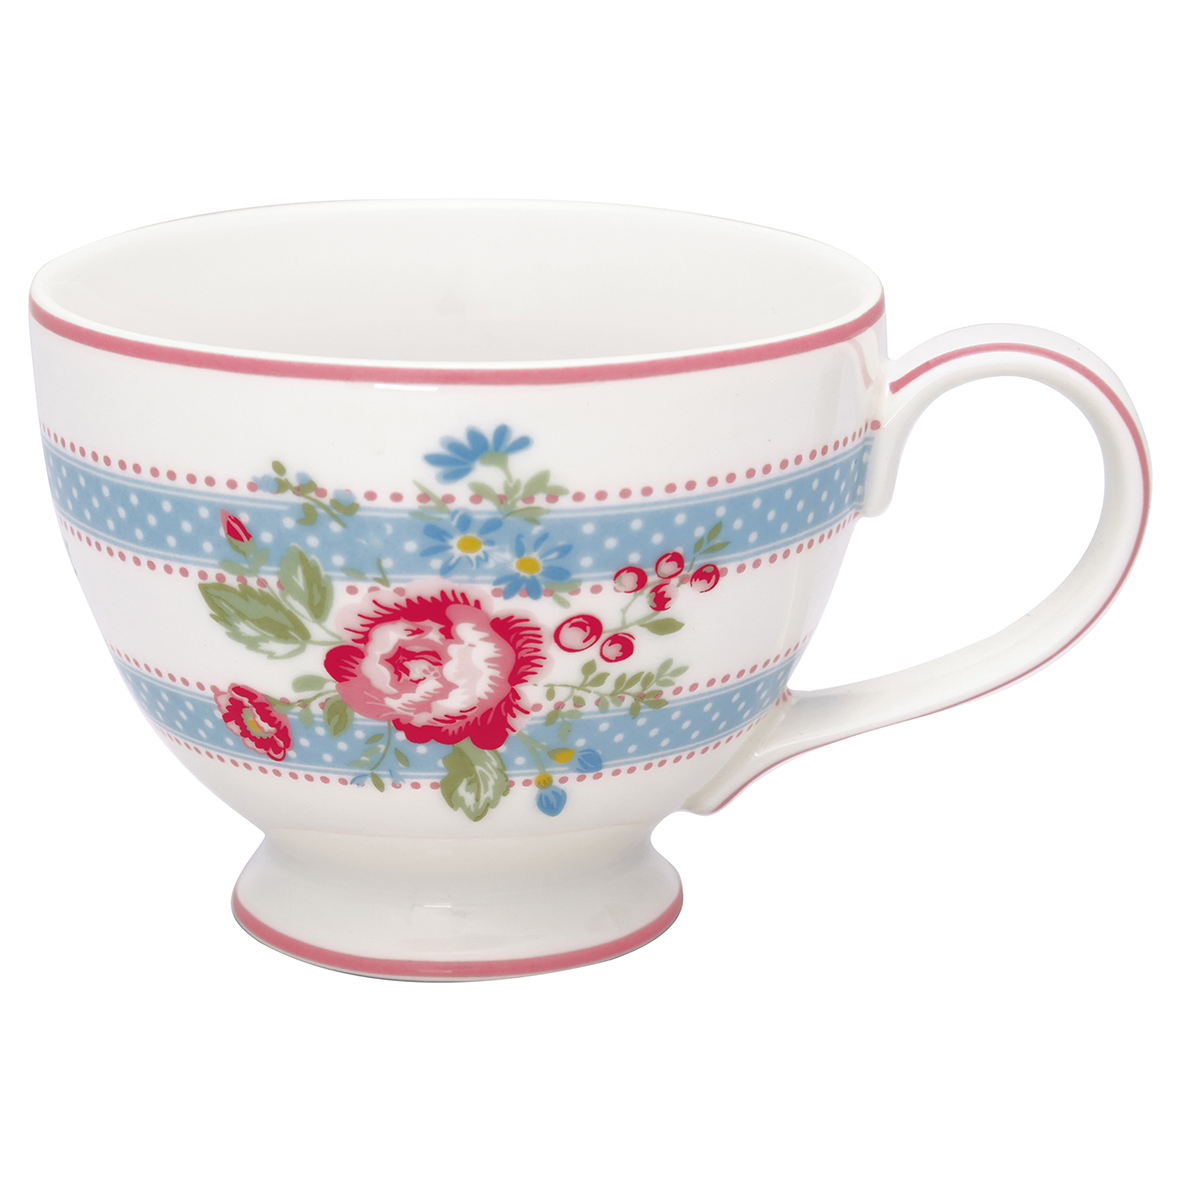 Greengate Teacup Evie white Becher